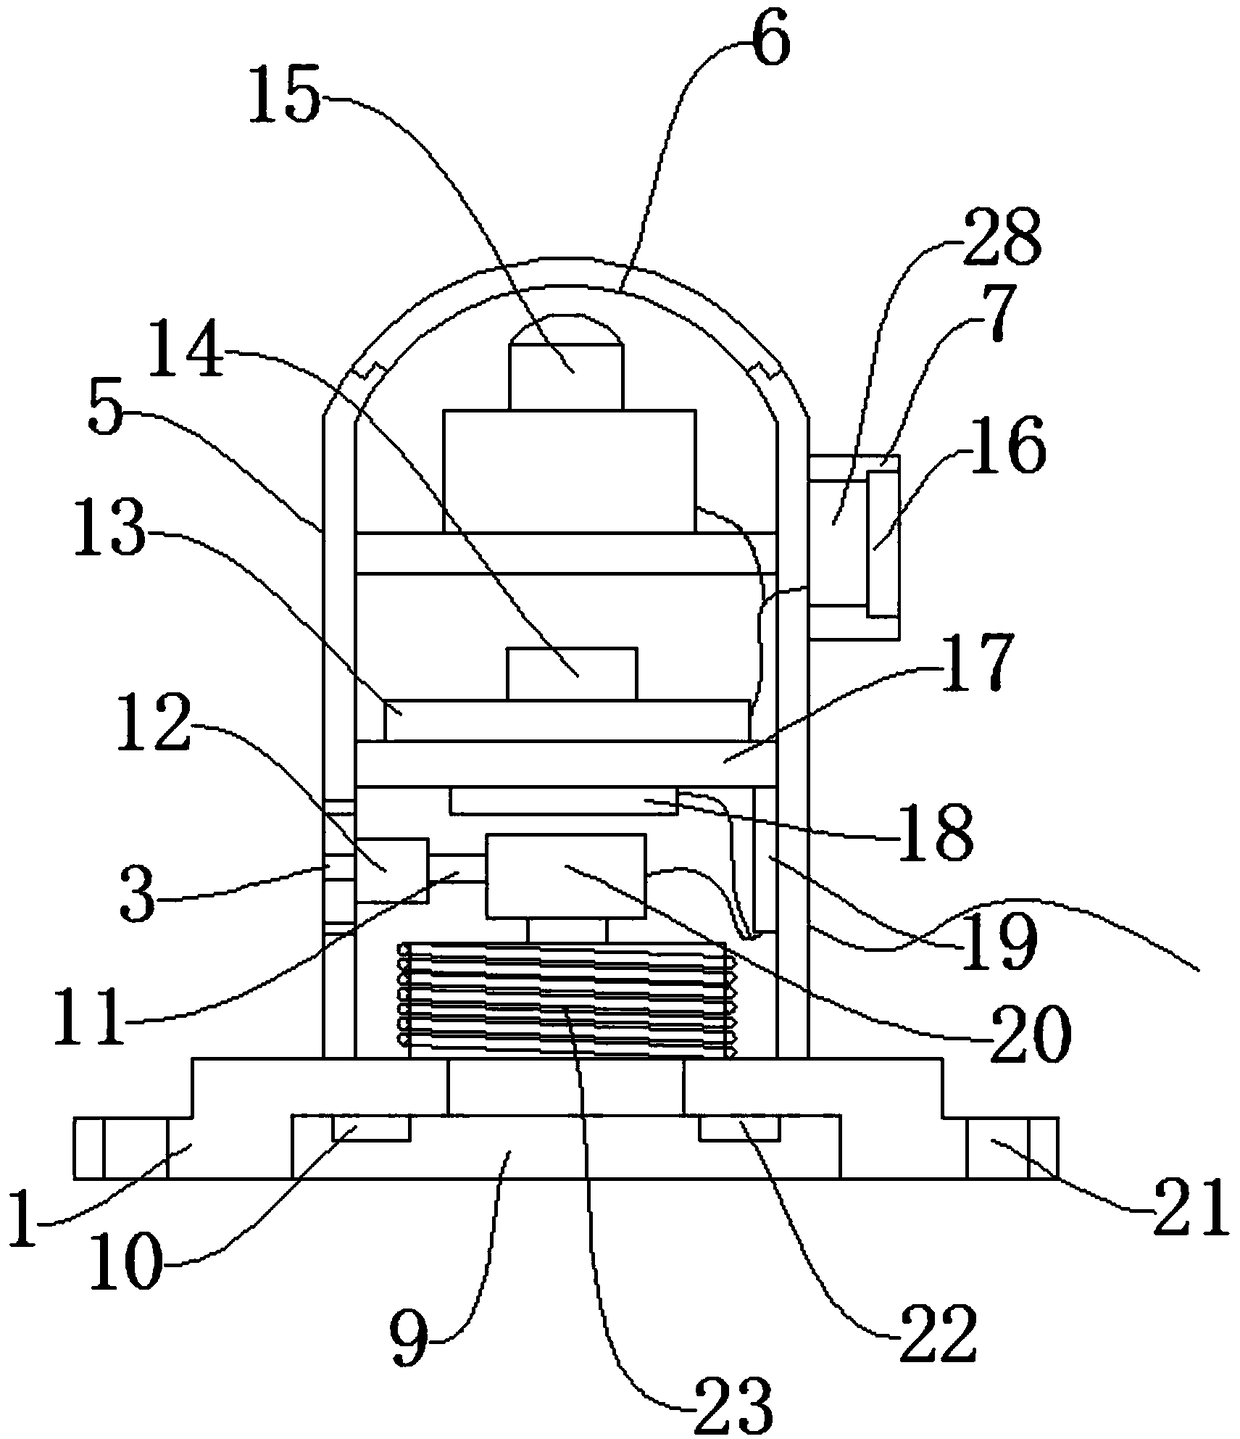 Pressure alarm device for electric pressure cooker and method for using same